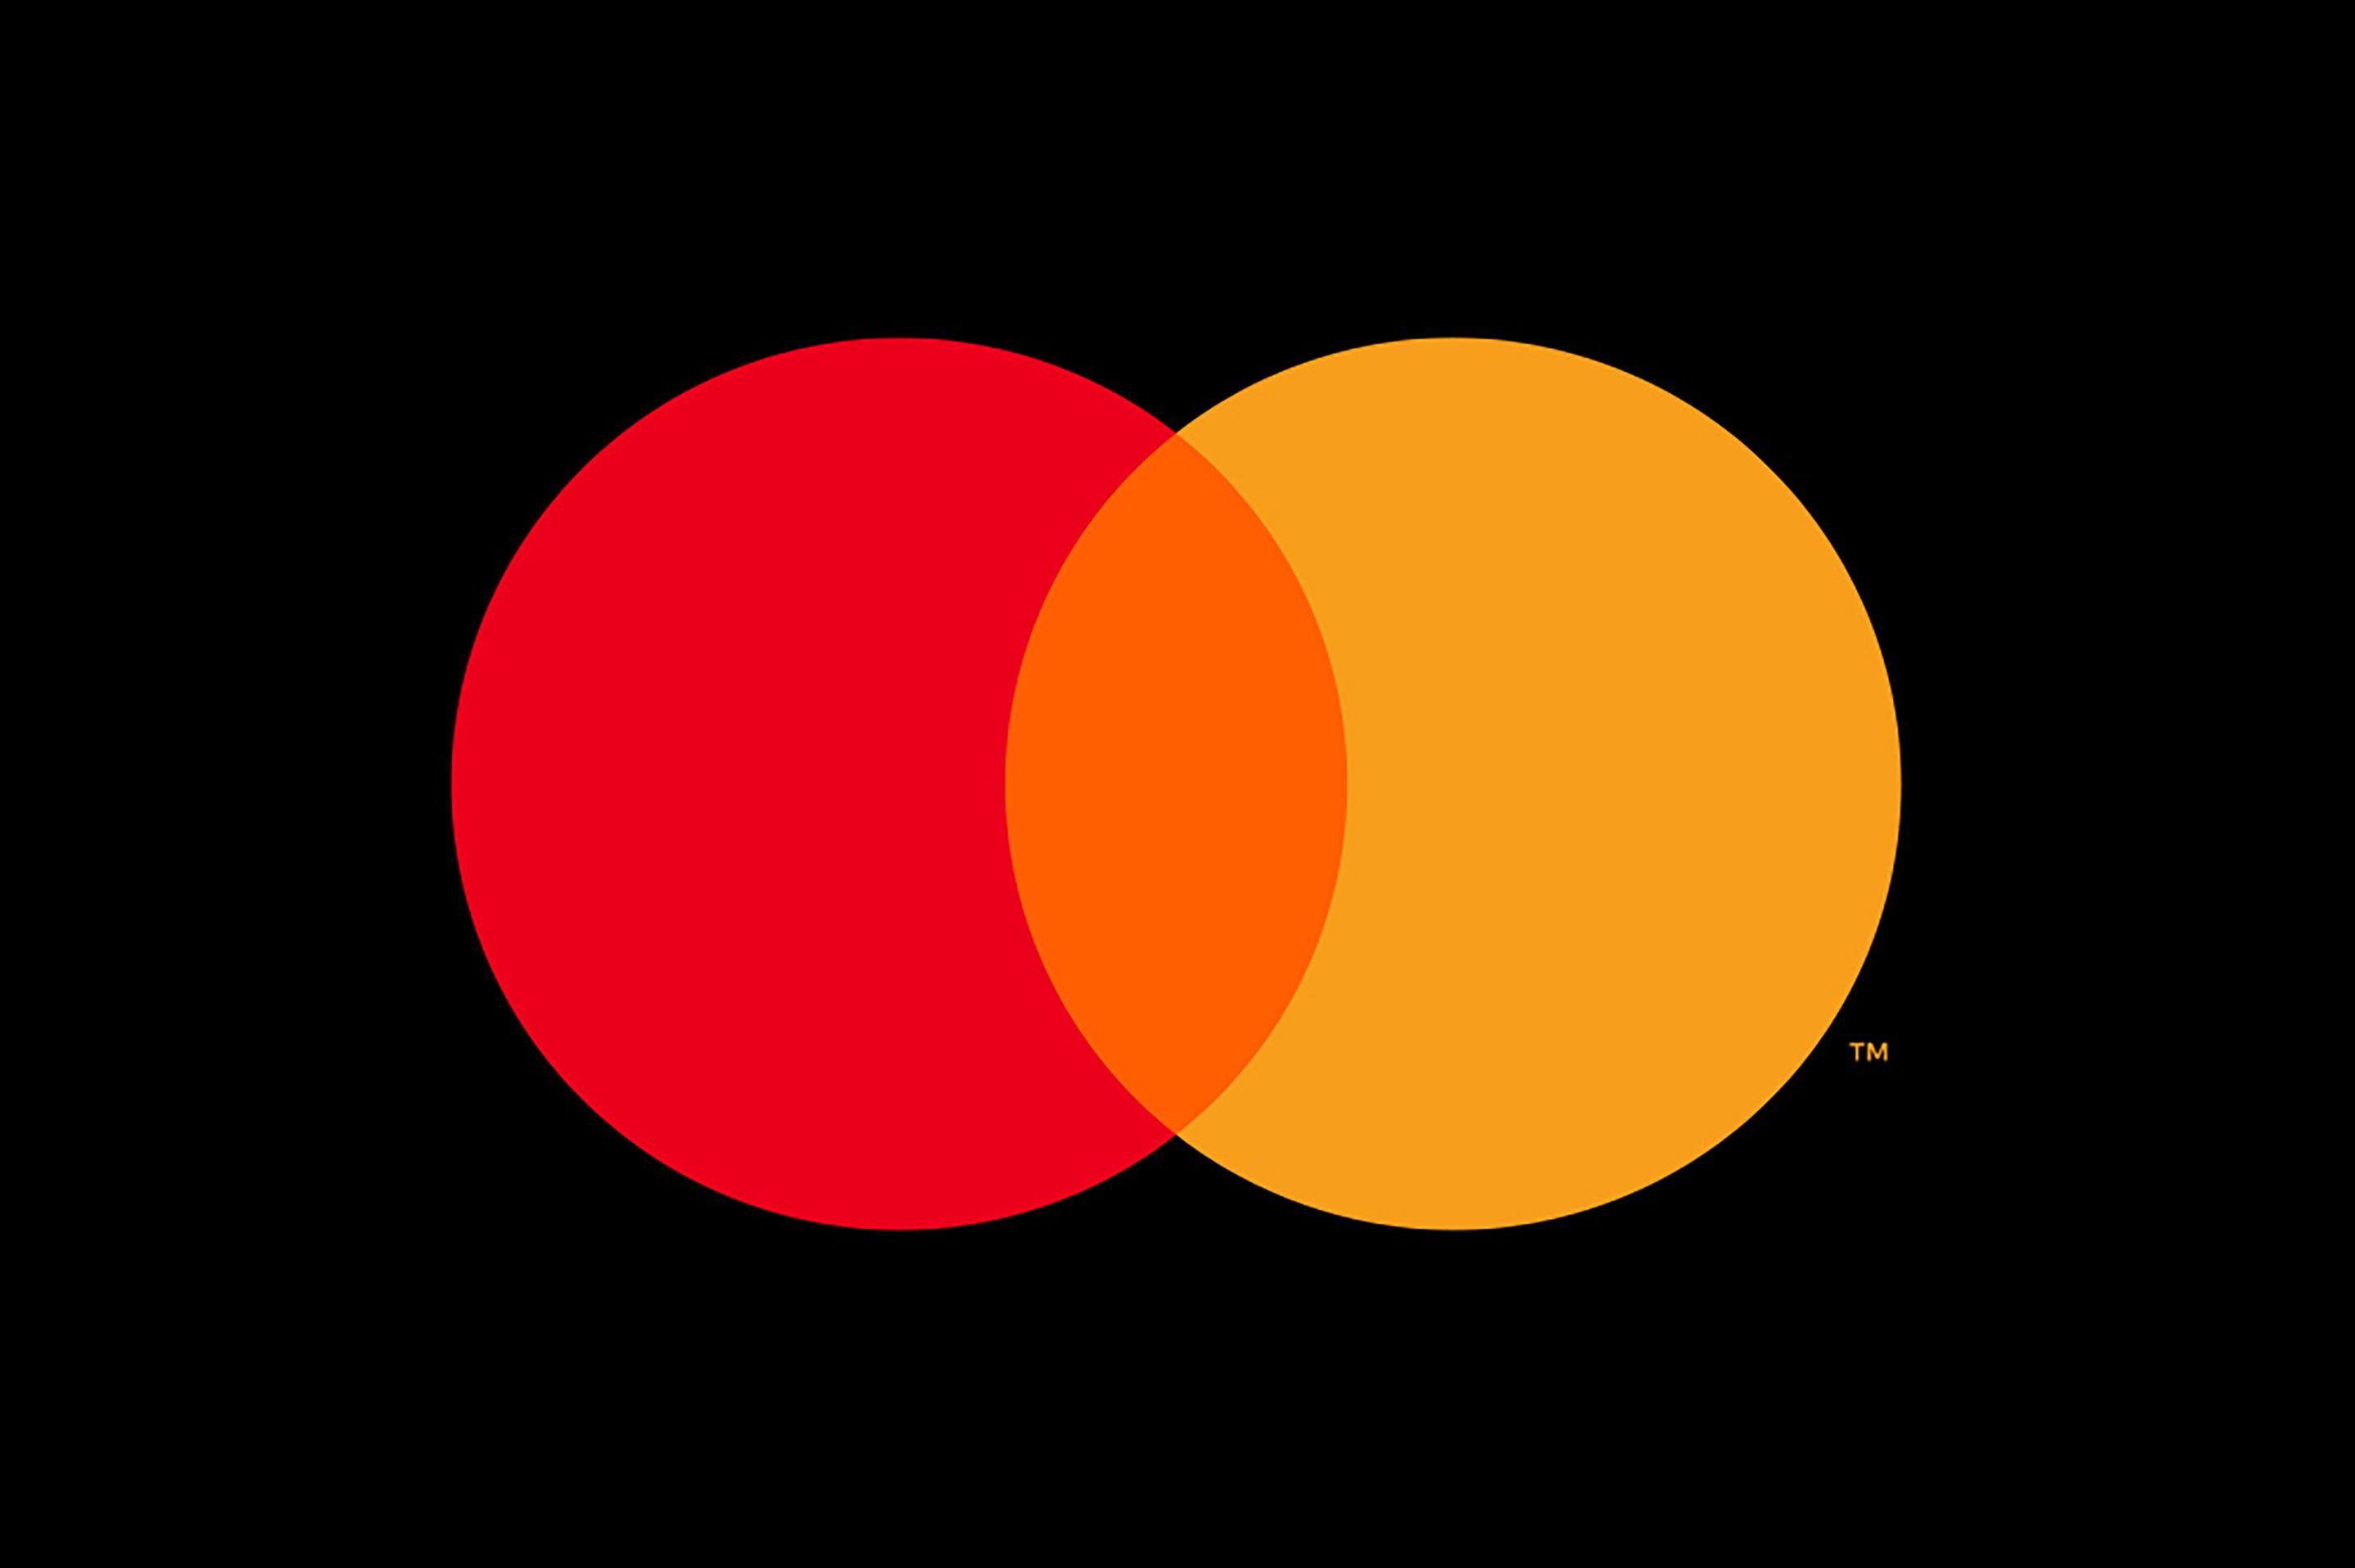 Red Orange Company Logo - Mastercard Drops Name From New Logo, In Style Of Apple, Nike, and ...